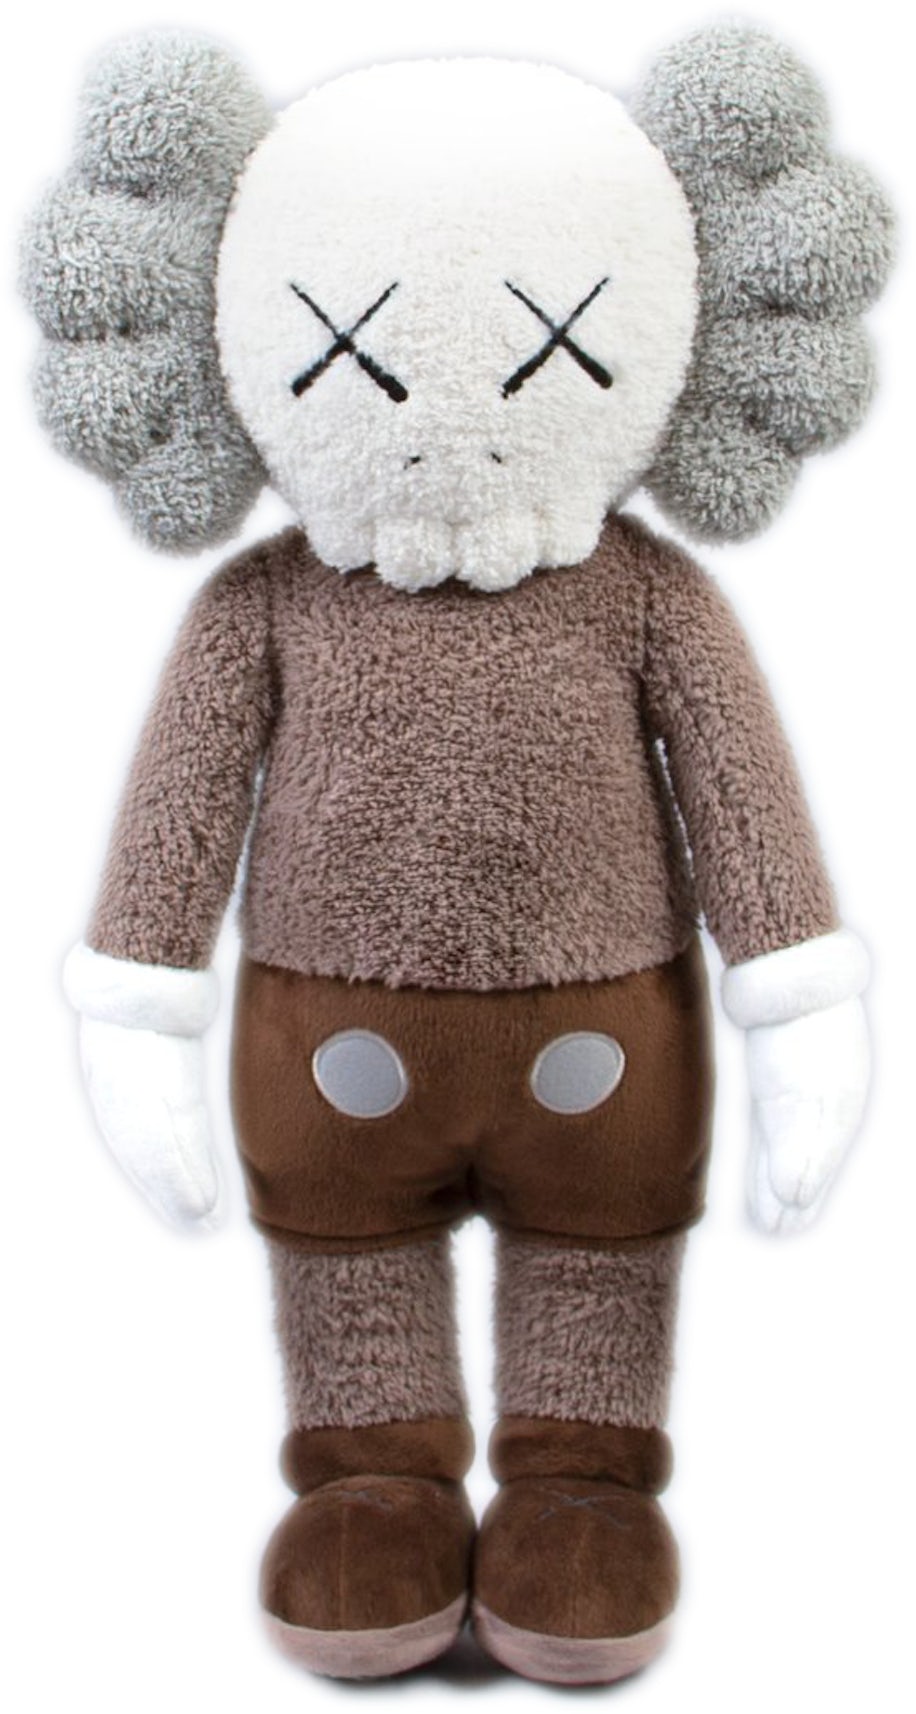 https://images.stockx.com/images/KAWS-HOLIDAY-Hong-Kong-Limited-20-Plush-Brown.png?fit=fill&bg=FFFFFF&w=1200&h=857&fm=jpg&auto=compress&dpr=2&trim=color&updated_at=1614784430&q=60